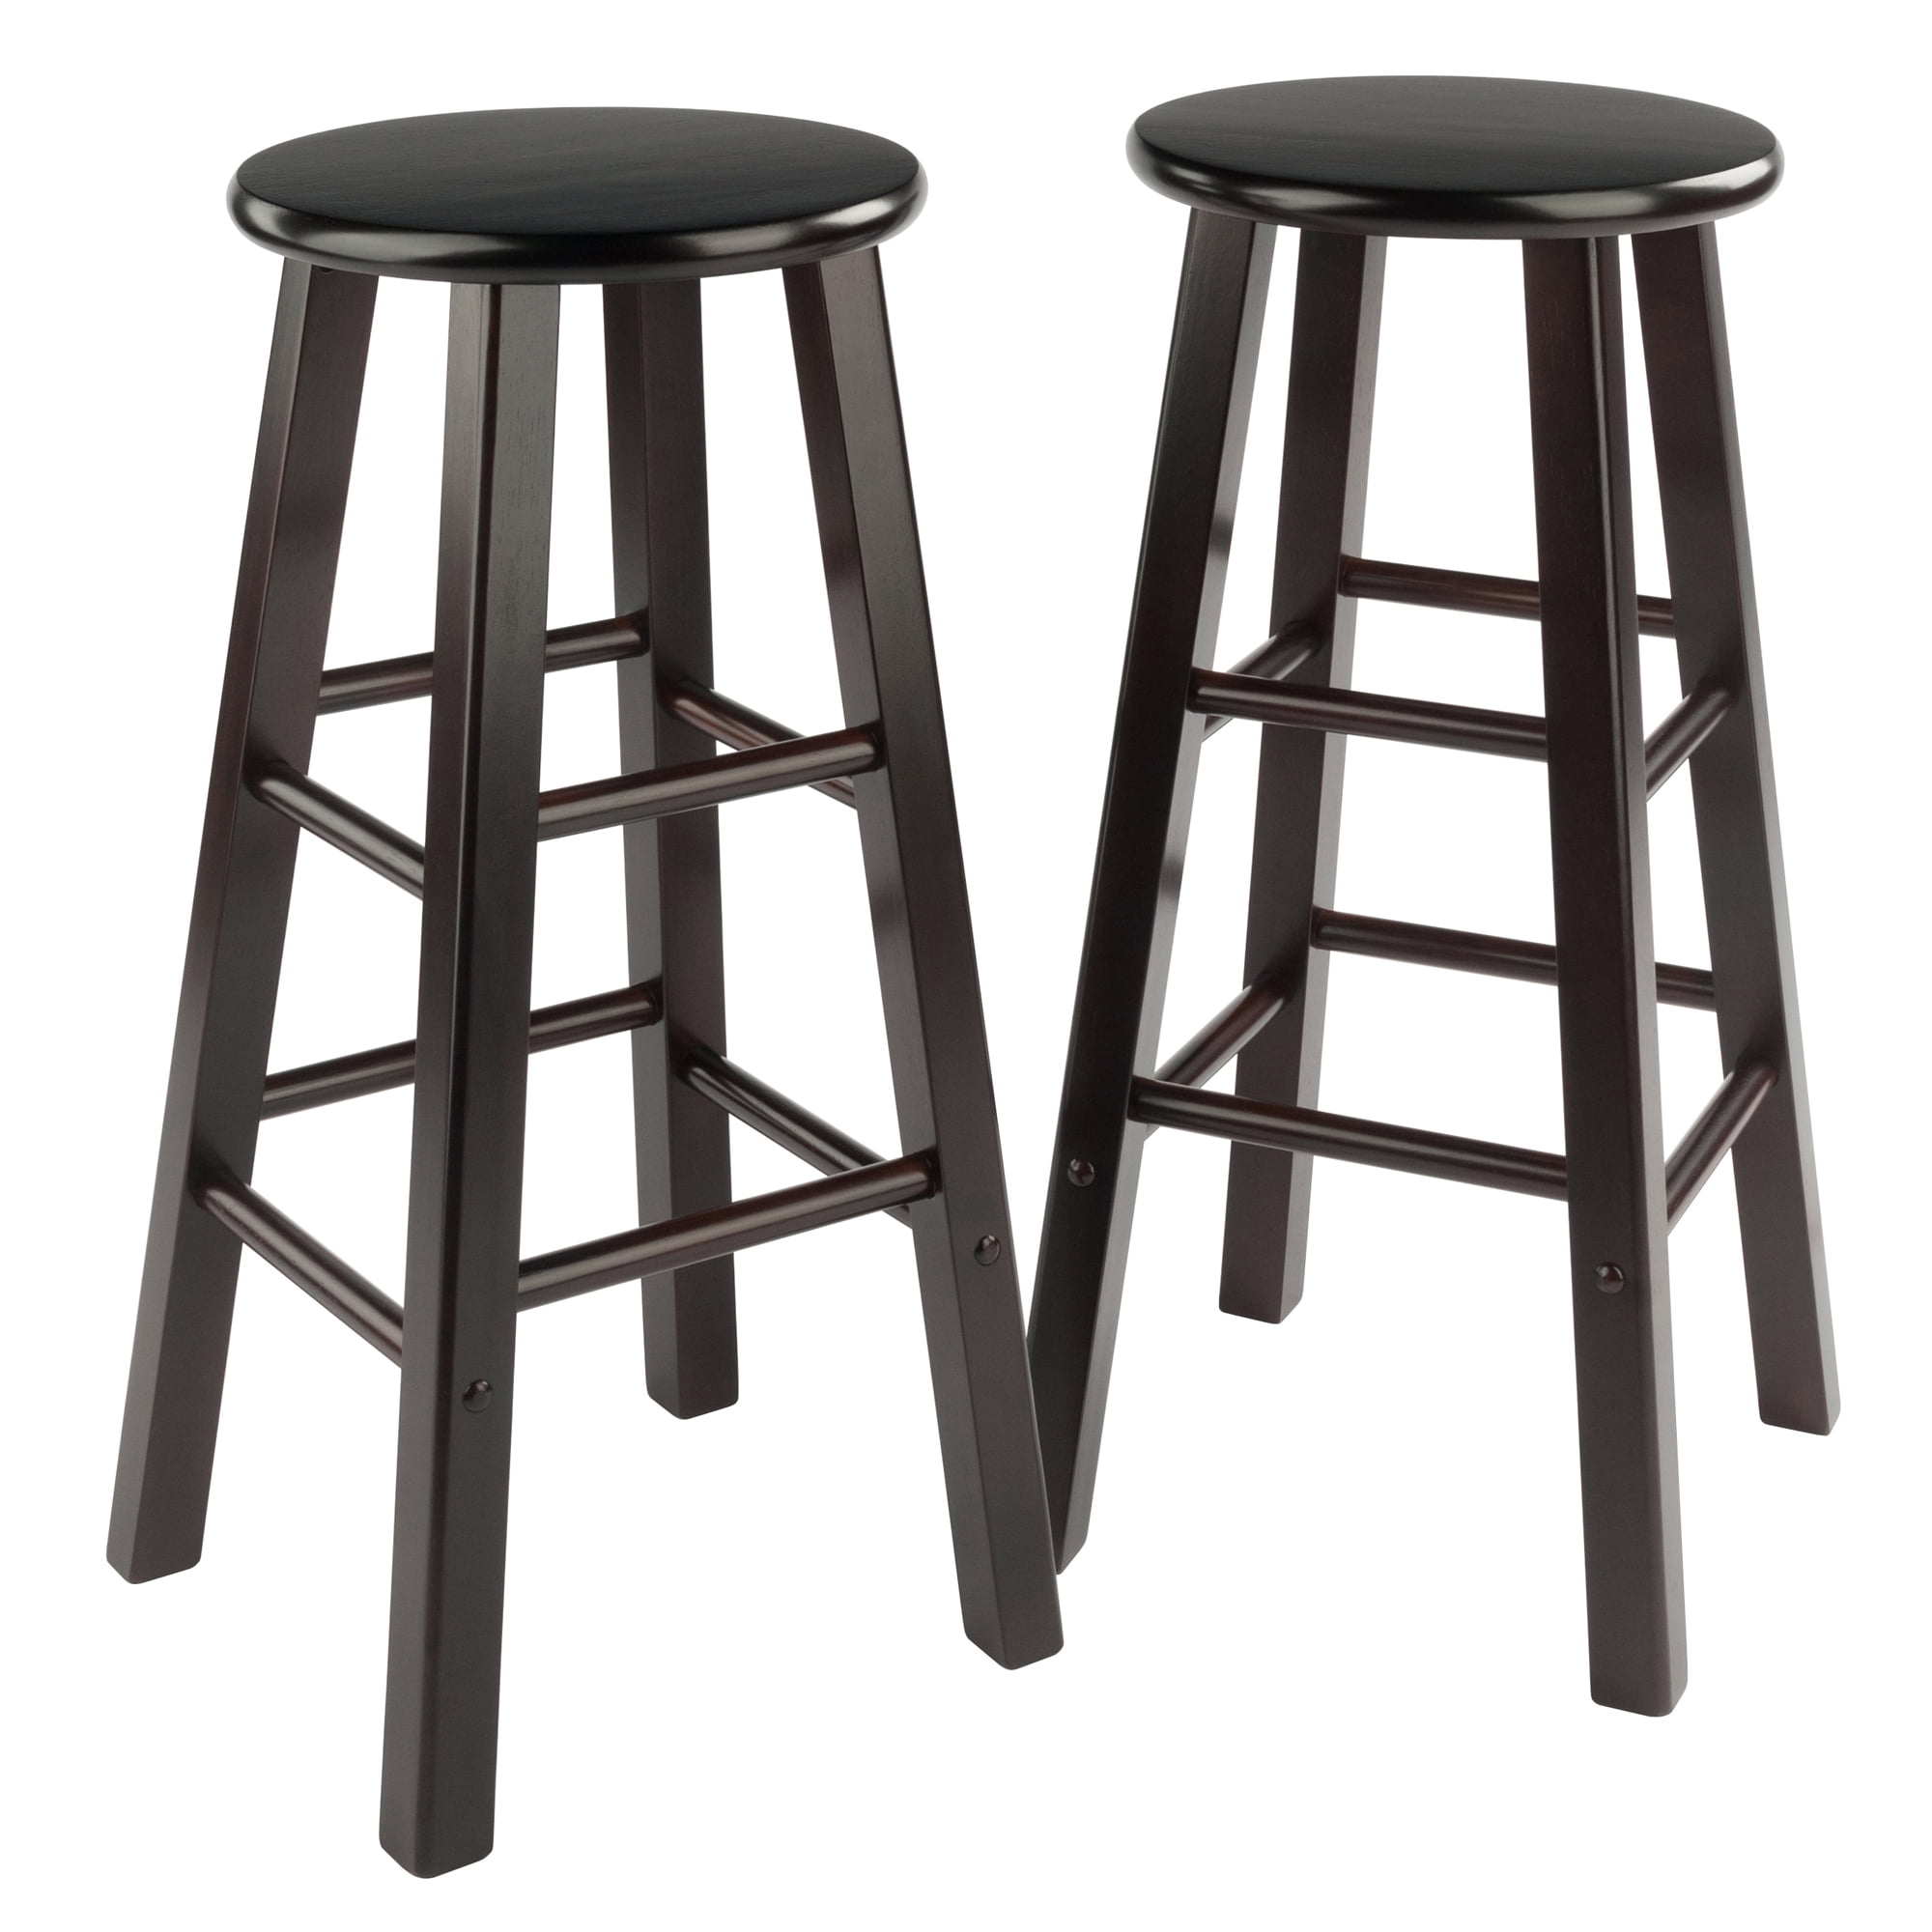 New Wood Kitchen Counter 2 Bar Stool Seat Leather Espresso Modern Stools 29" 